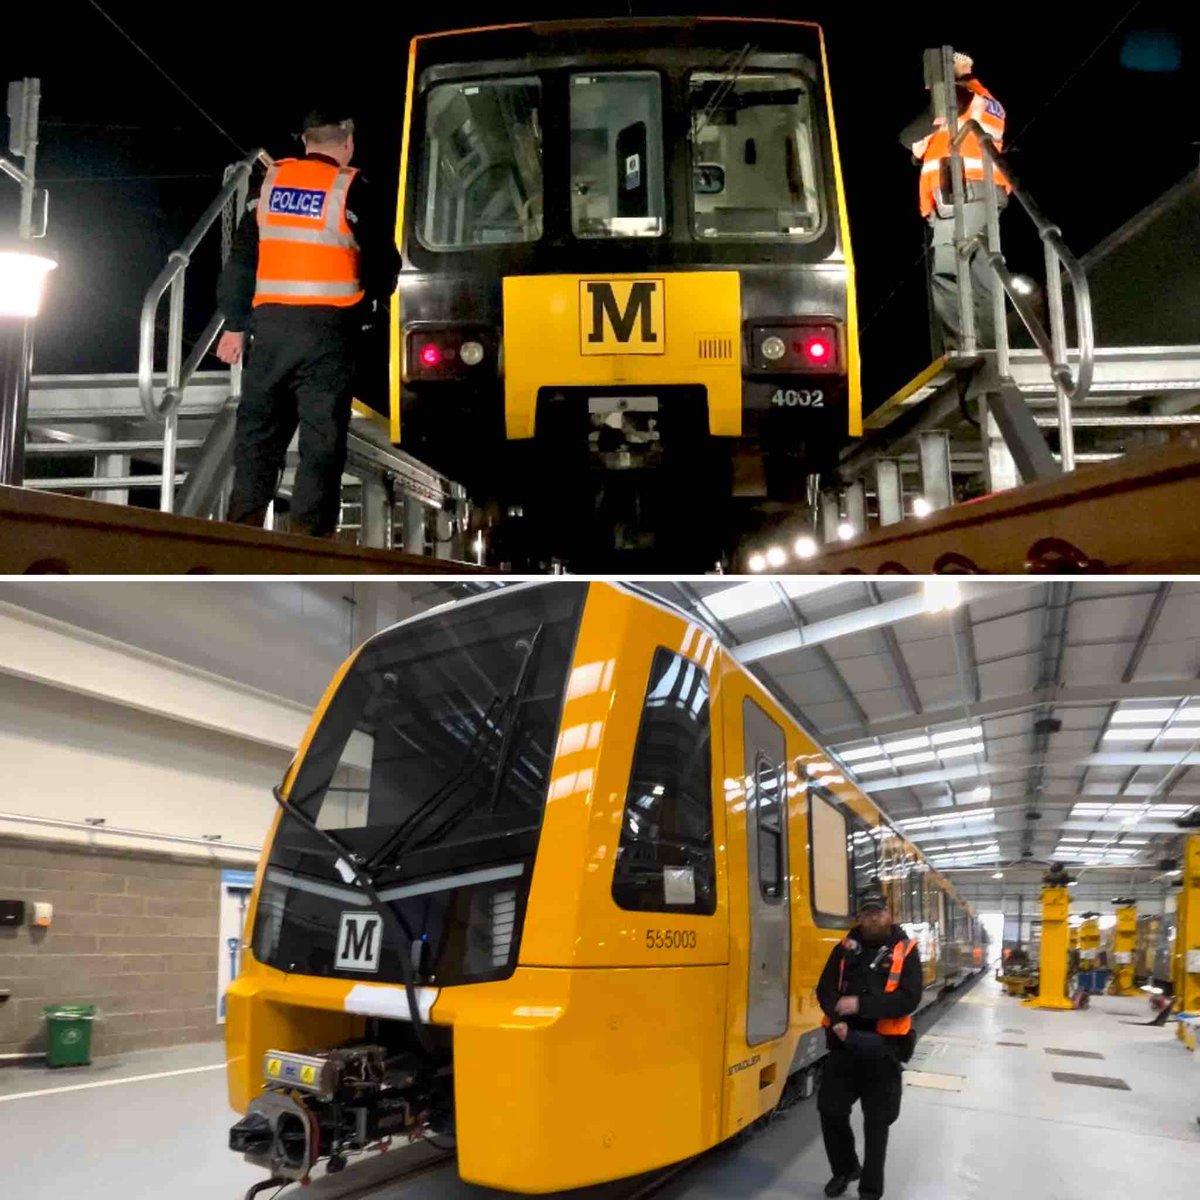 #MetroNPT Future is bright @My_Metro 100% + increase-HD CCTV cameras on new trains.New deployable,mobile knife arches.X11 dedicated specially trained Police 👮‍♂️ Unit.X2 dedicated PCSOs.Additional Metro security staff. #KeepingMetroSafe #NorthumbriaPolice #Nexus #Metro